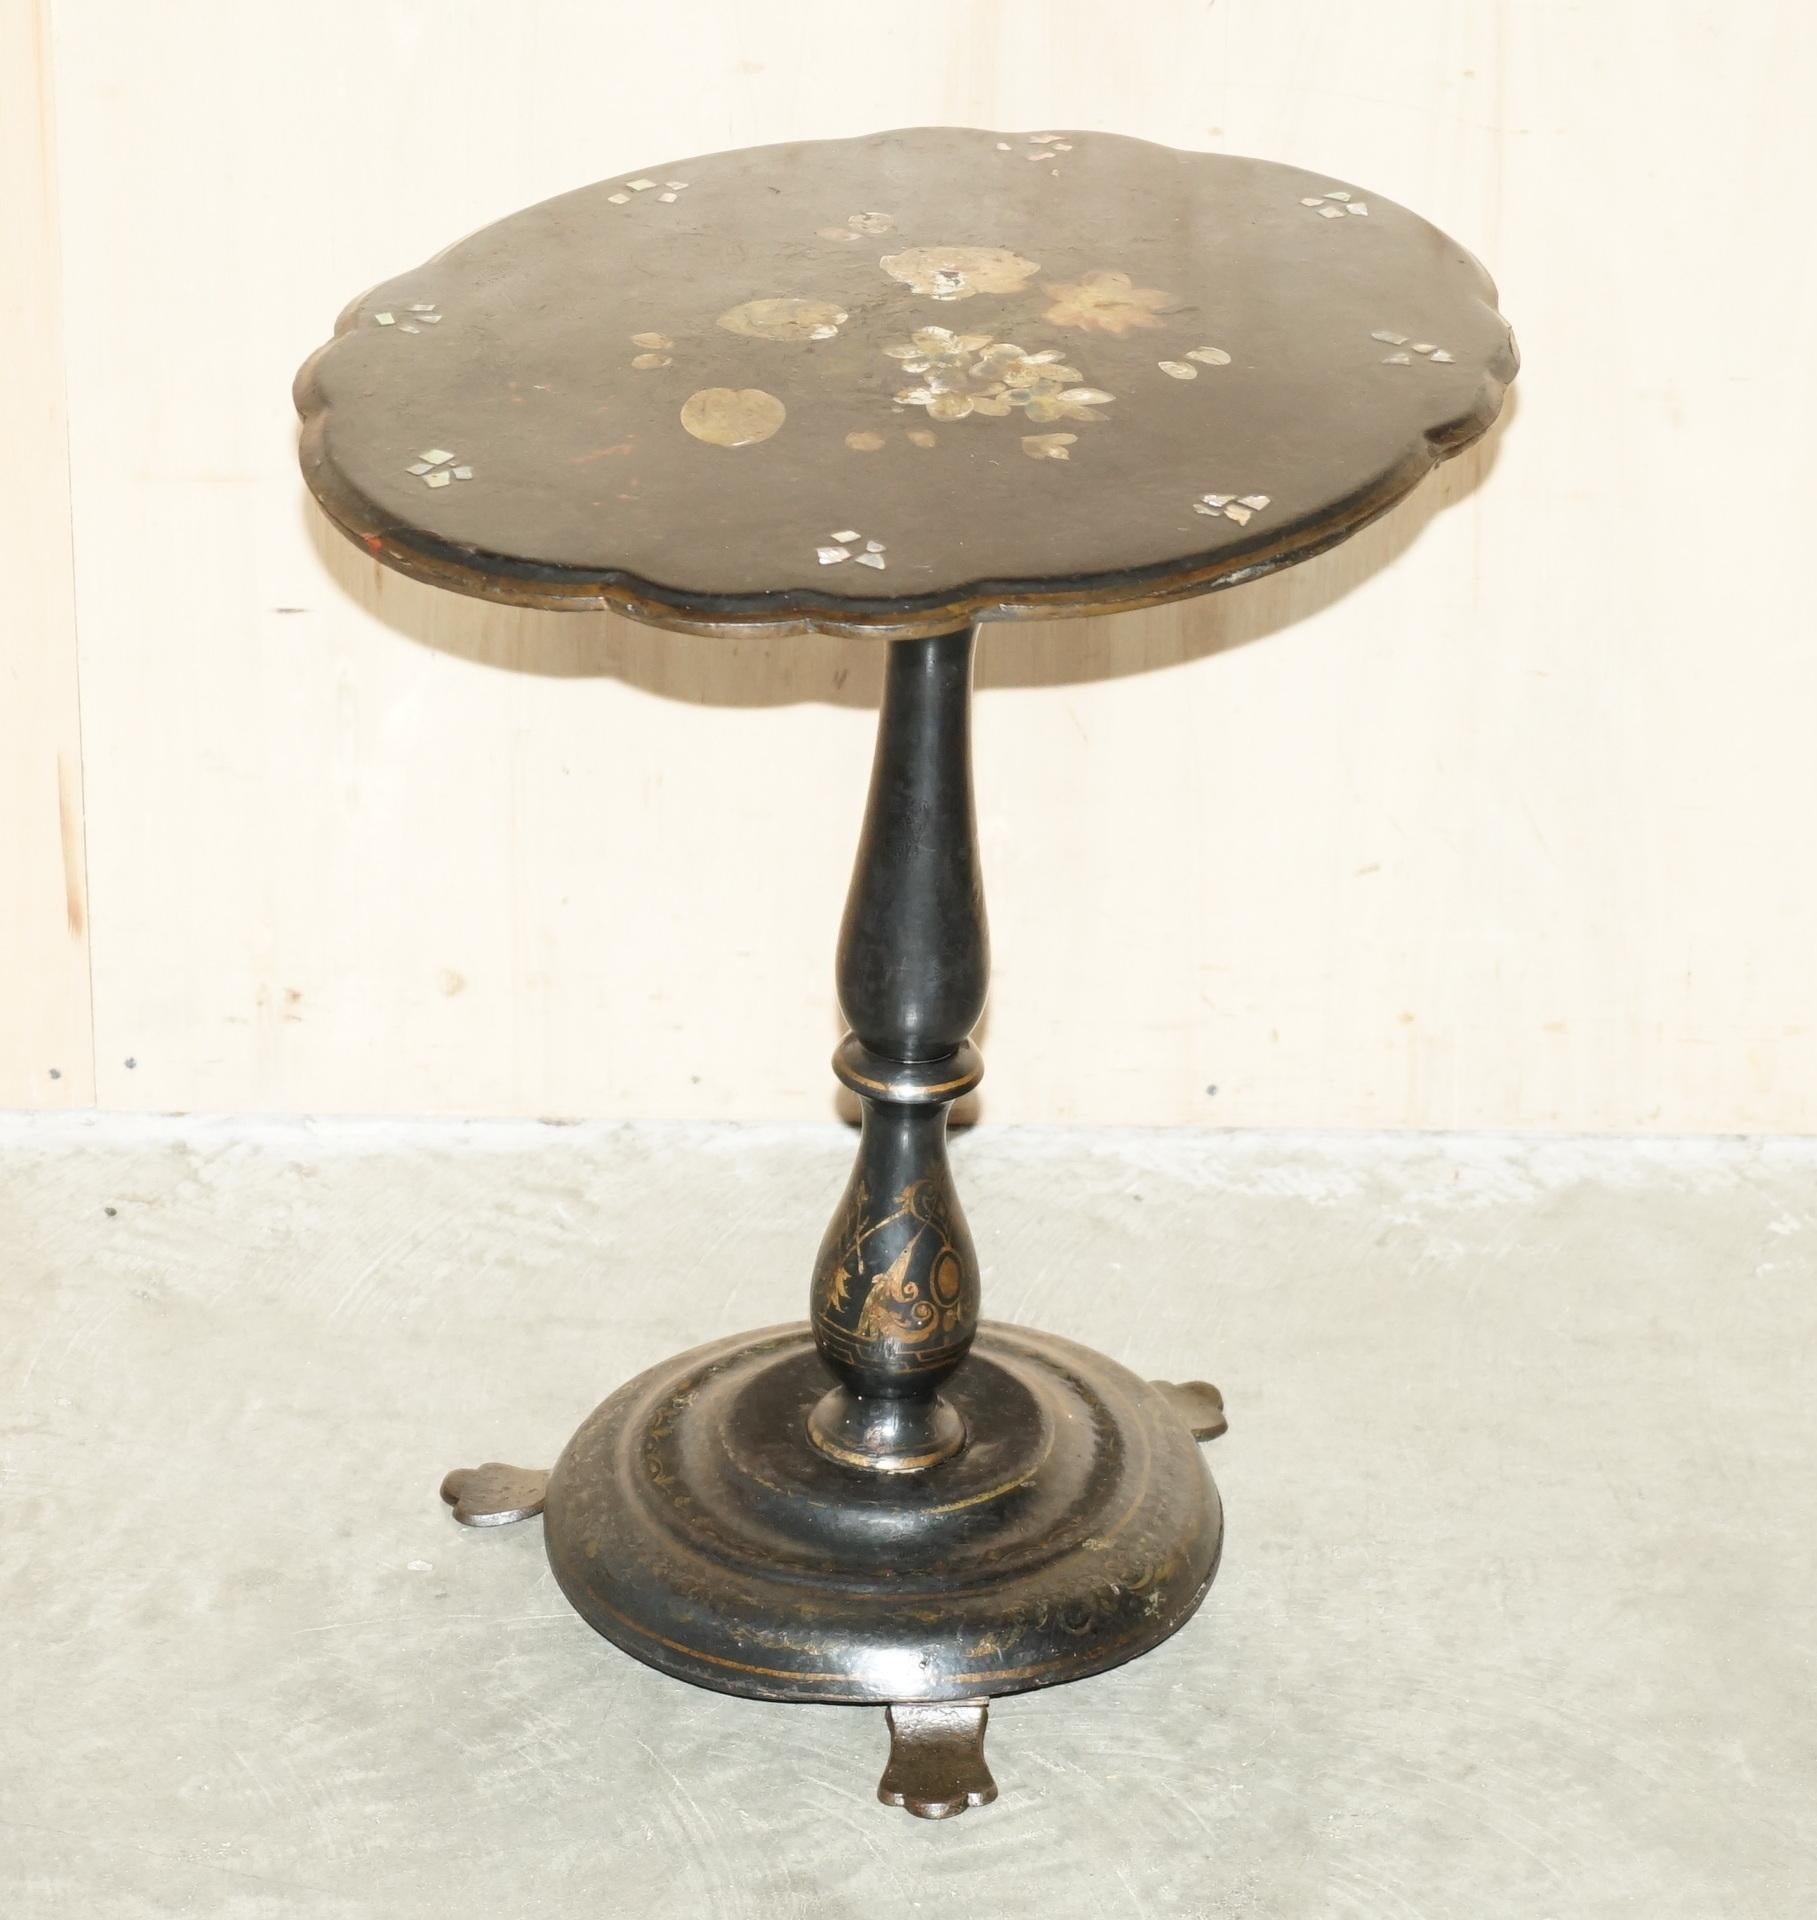 Royal House Antiques

Royal House Antiques is delighted to offer for sale this very fine Antique Regency circa 1810-1820 black lacquered with Mother of Pearl inlaid and Phosphor Bronze feet occasional table 

Please note the delivery fee listed is